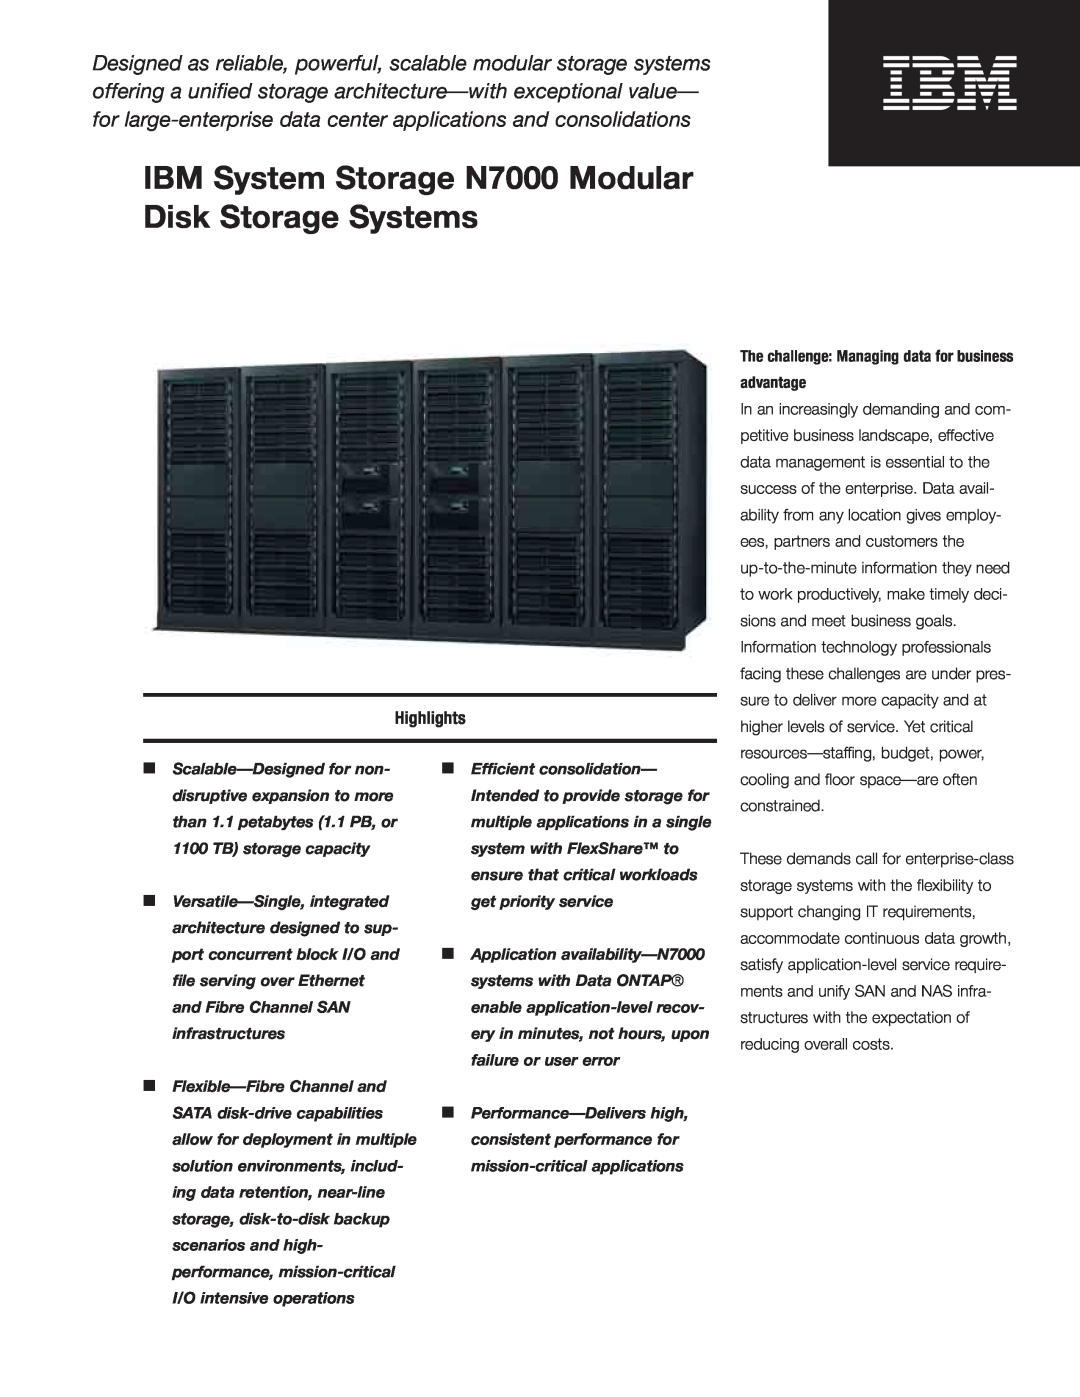 IBM N7000 manual Highlights, The challenge Managing data for business advantage 